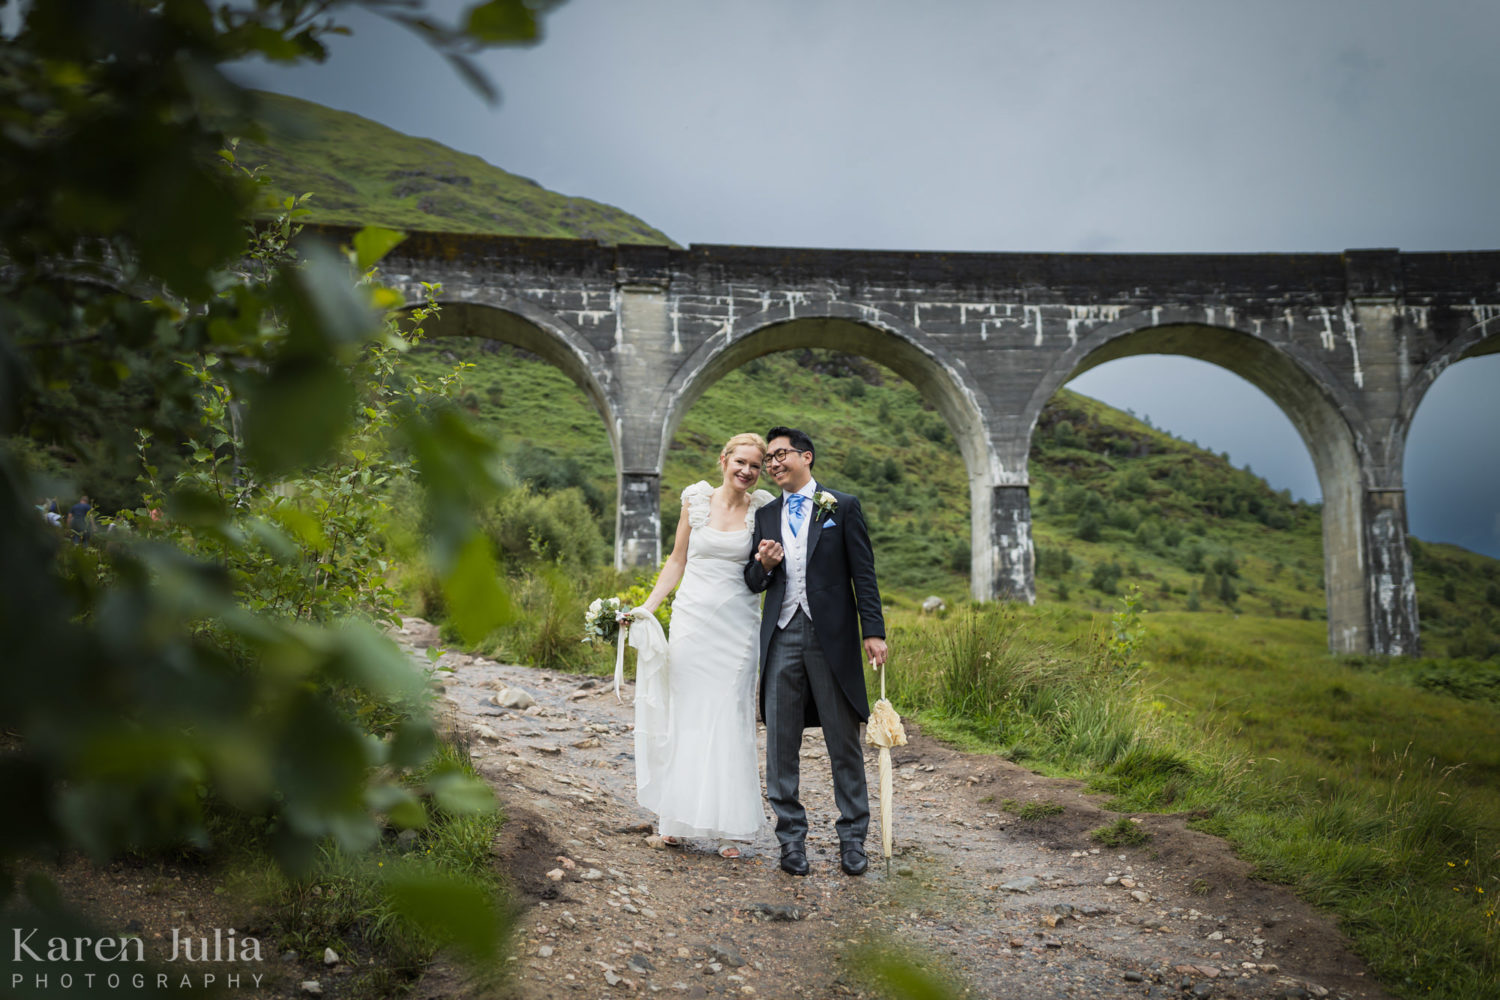 bride and groom briefly stop for a posed portrait photo with Glenfinnan Viaduct in the background